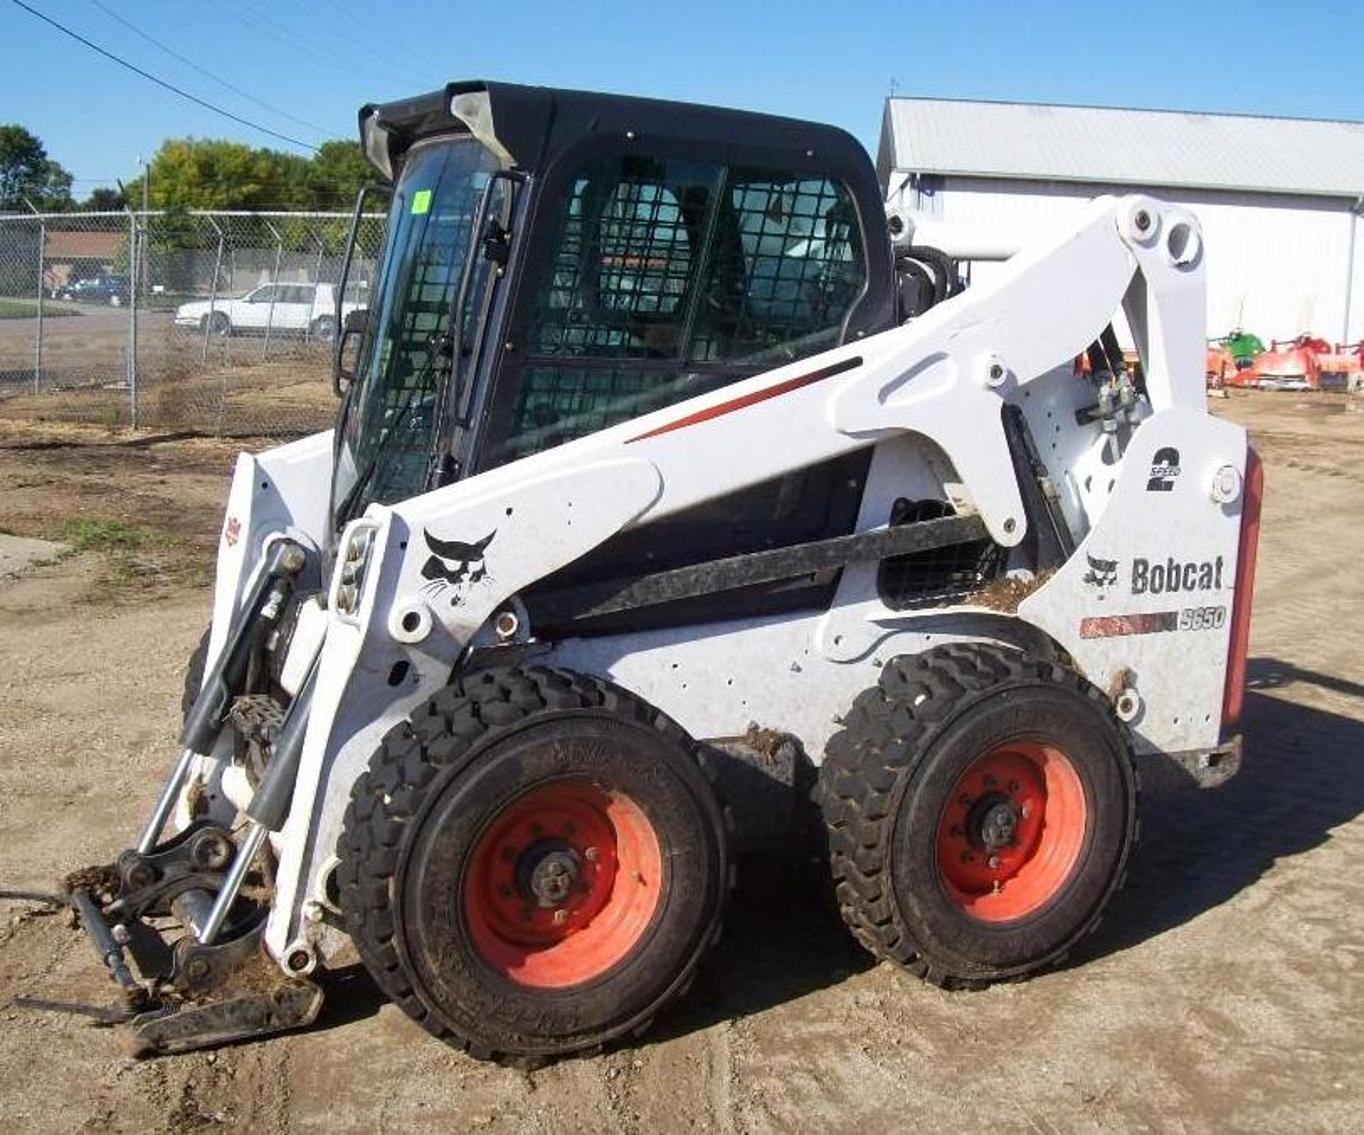 Hurkes Implement Inventory Reduction Auction